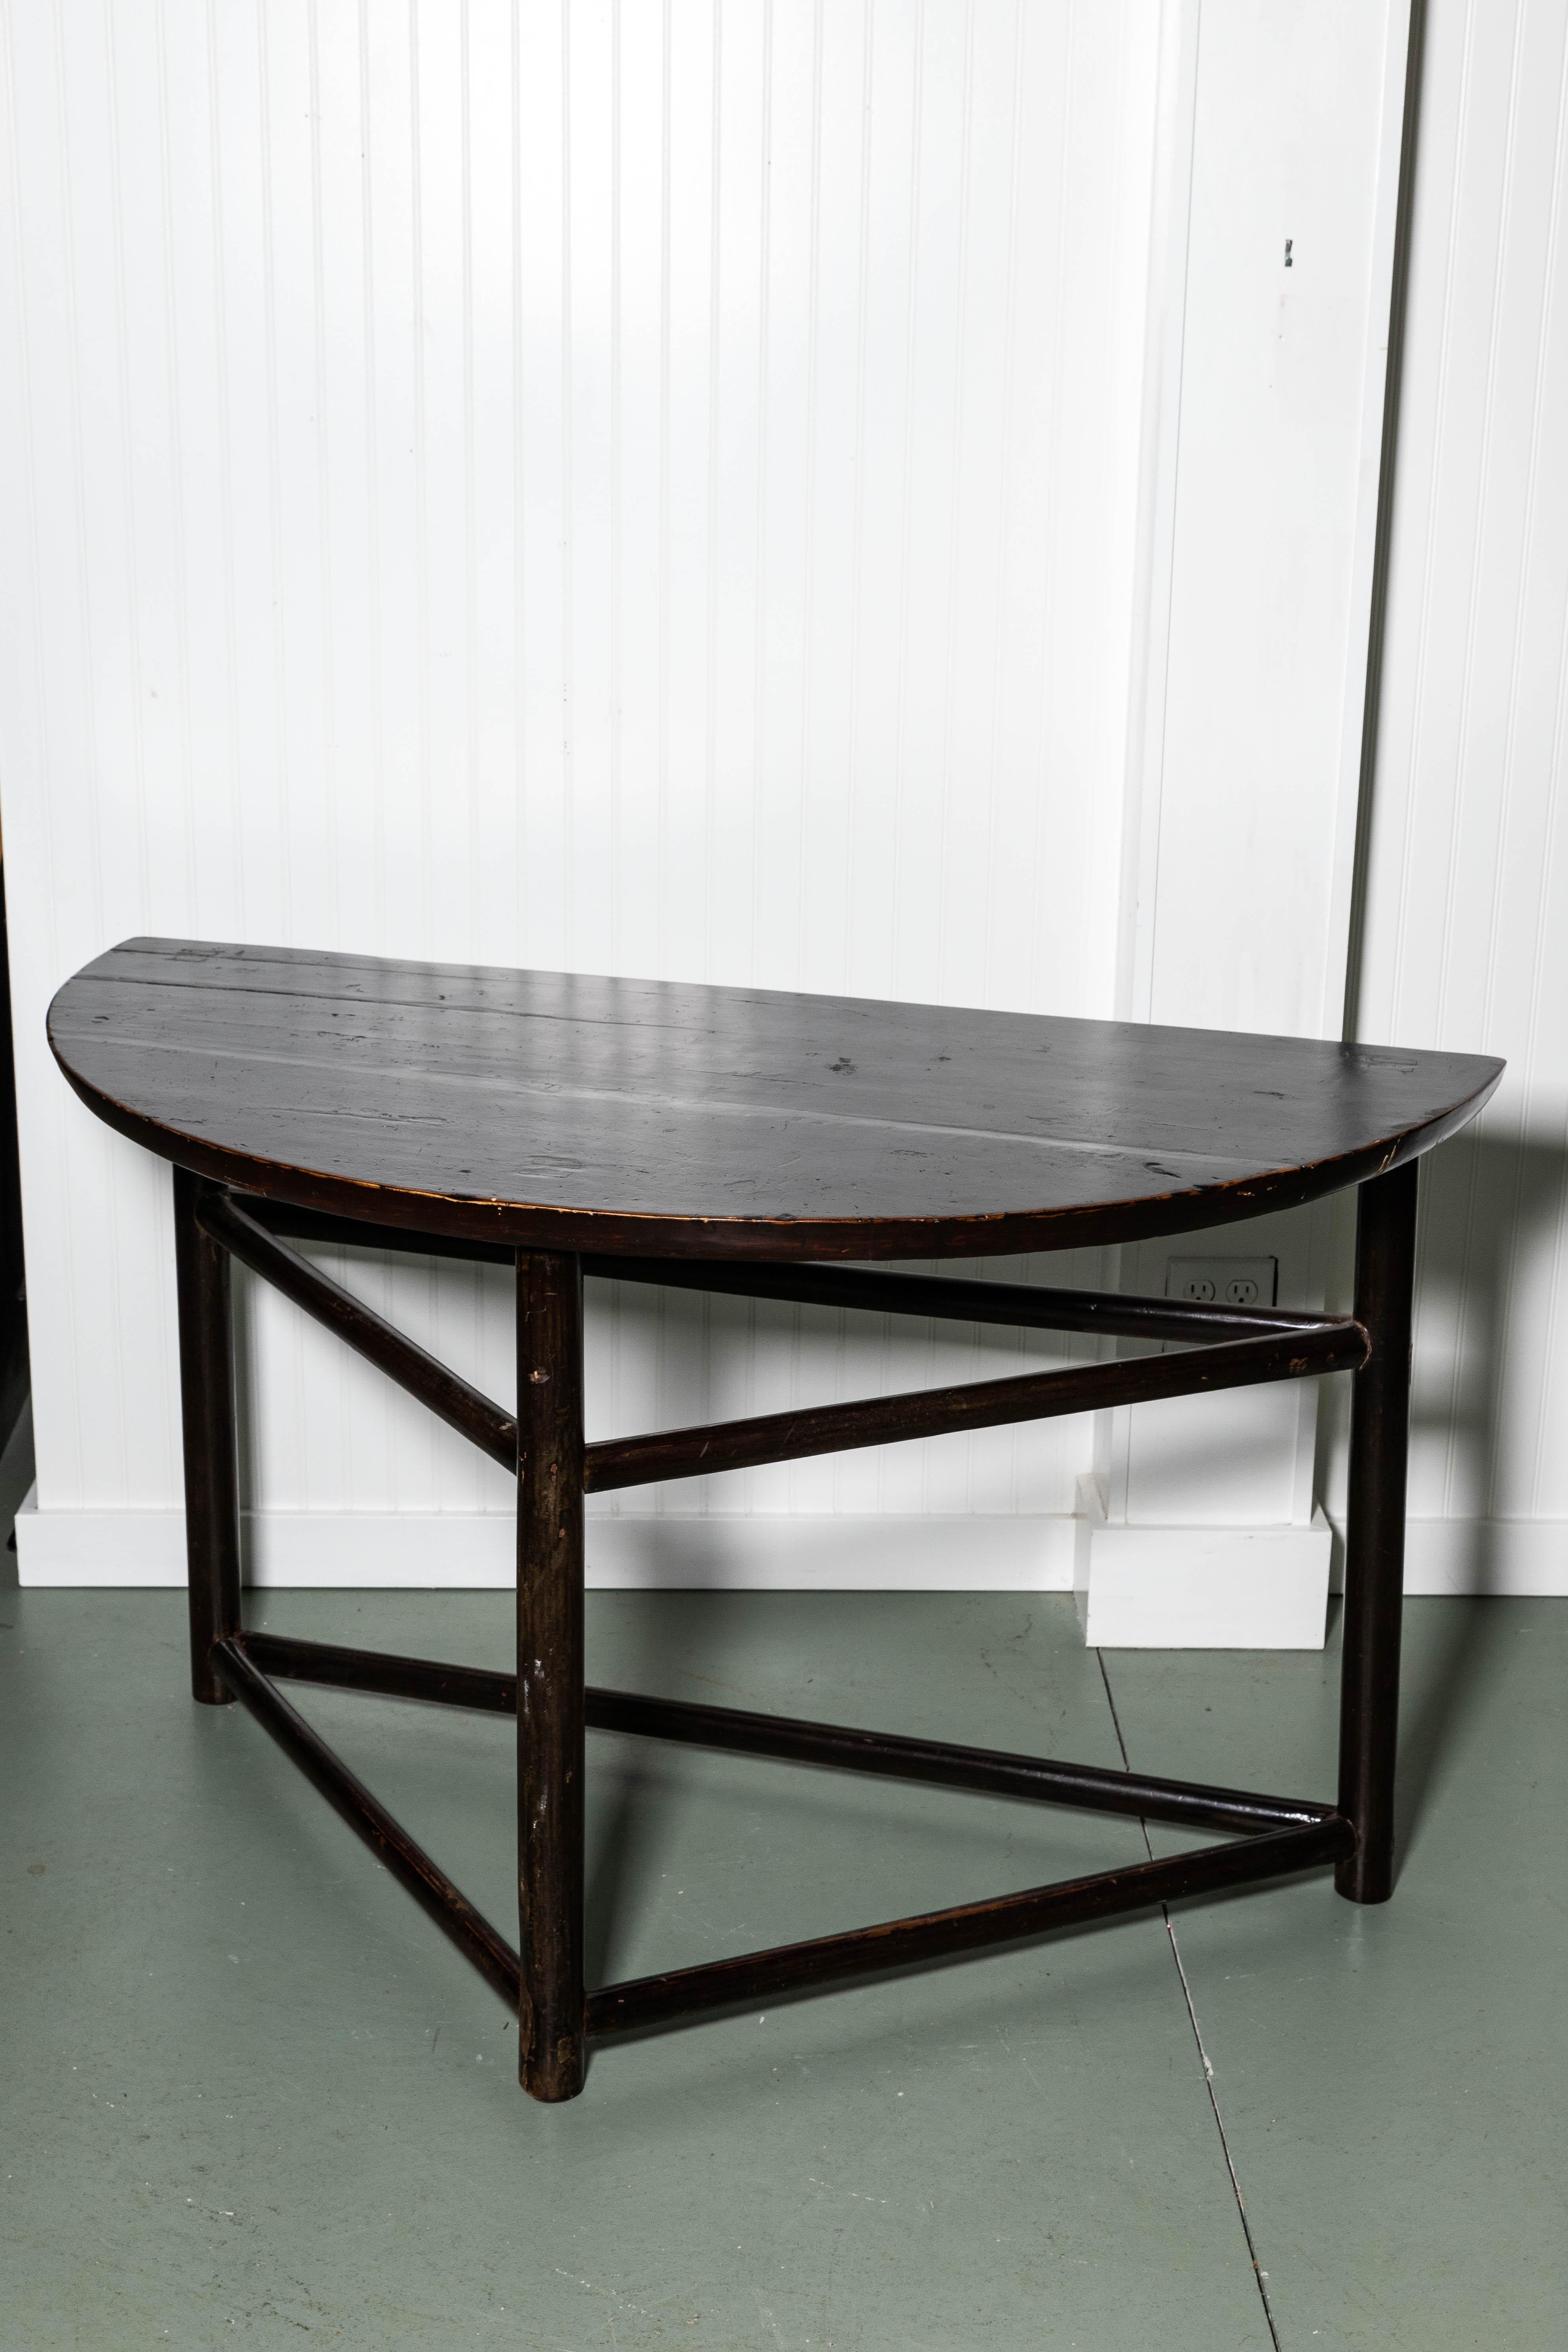 Beautiful Asian style demilune tables, hardwood with black lacquer finish. Three legged table with peg construction. Stretchers on both bottom and three quarter of way up legs. Round straight legs, oval shaped stretchers.